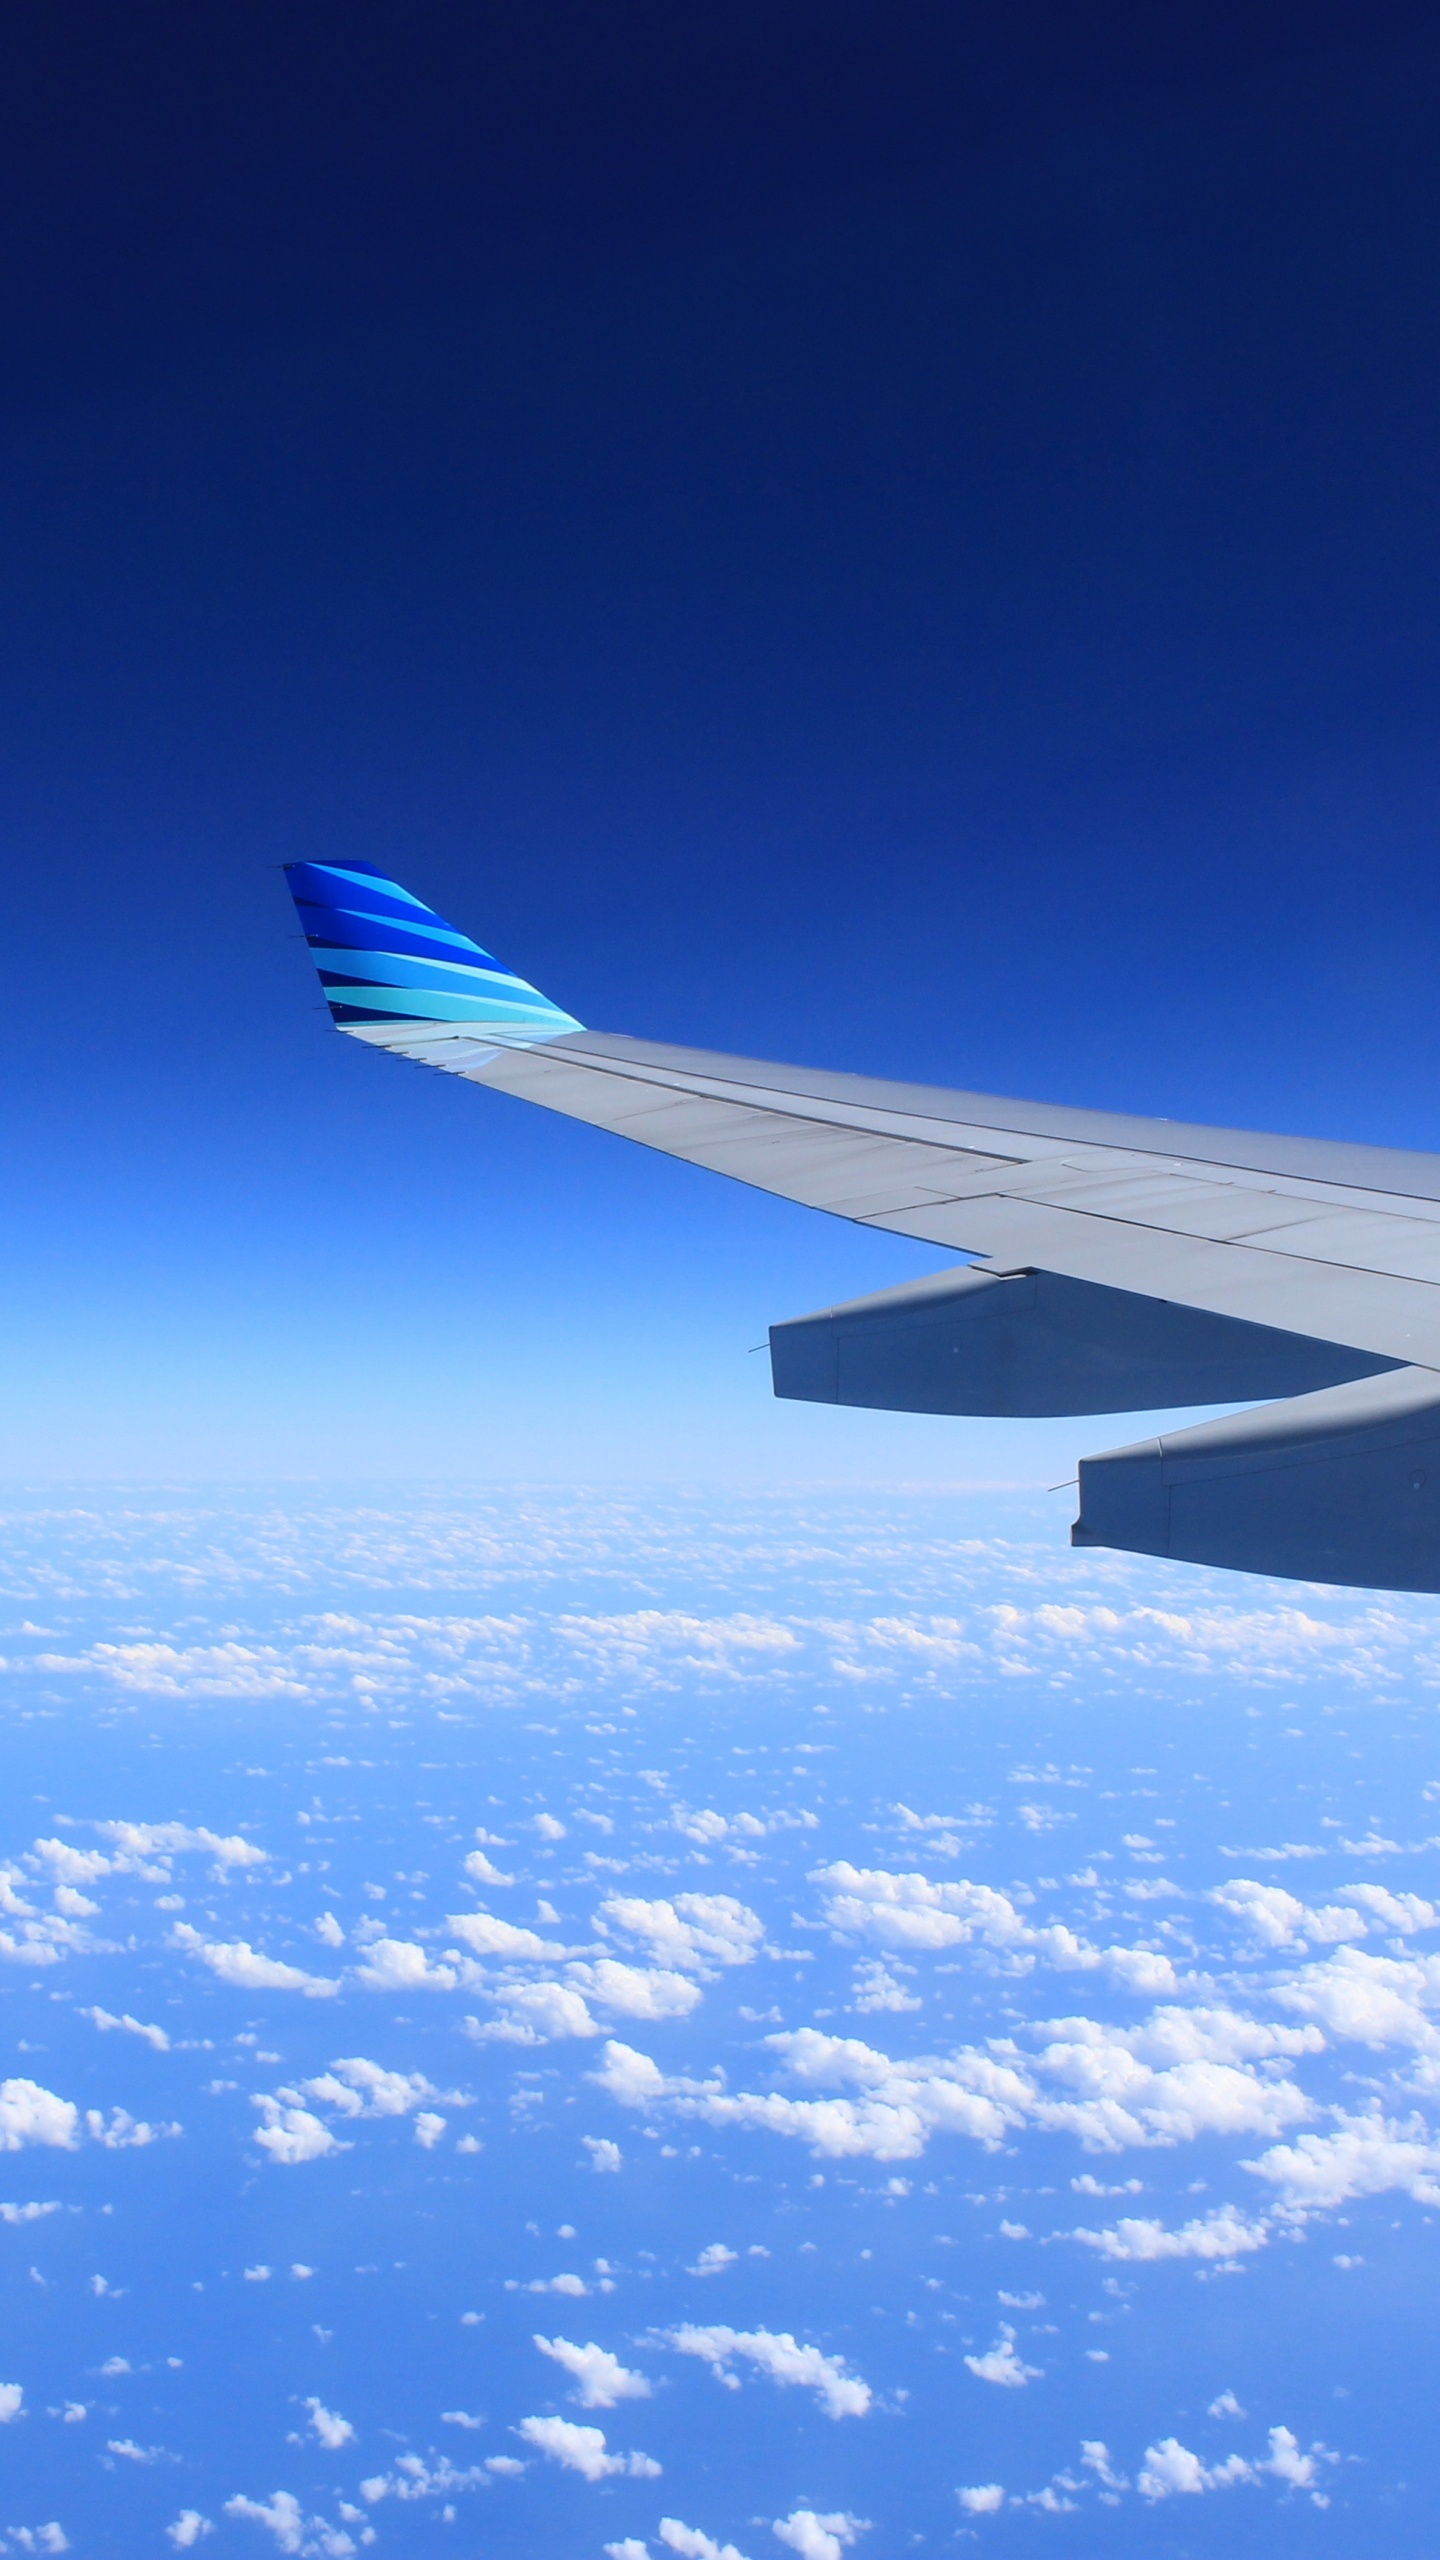 White and Blue Airplane Wing Under Blue Sky During Daytime. Wallpaper in 1440x2560 Resolution